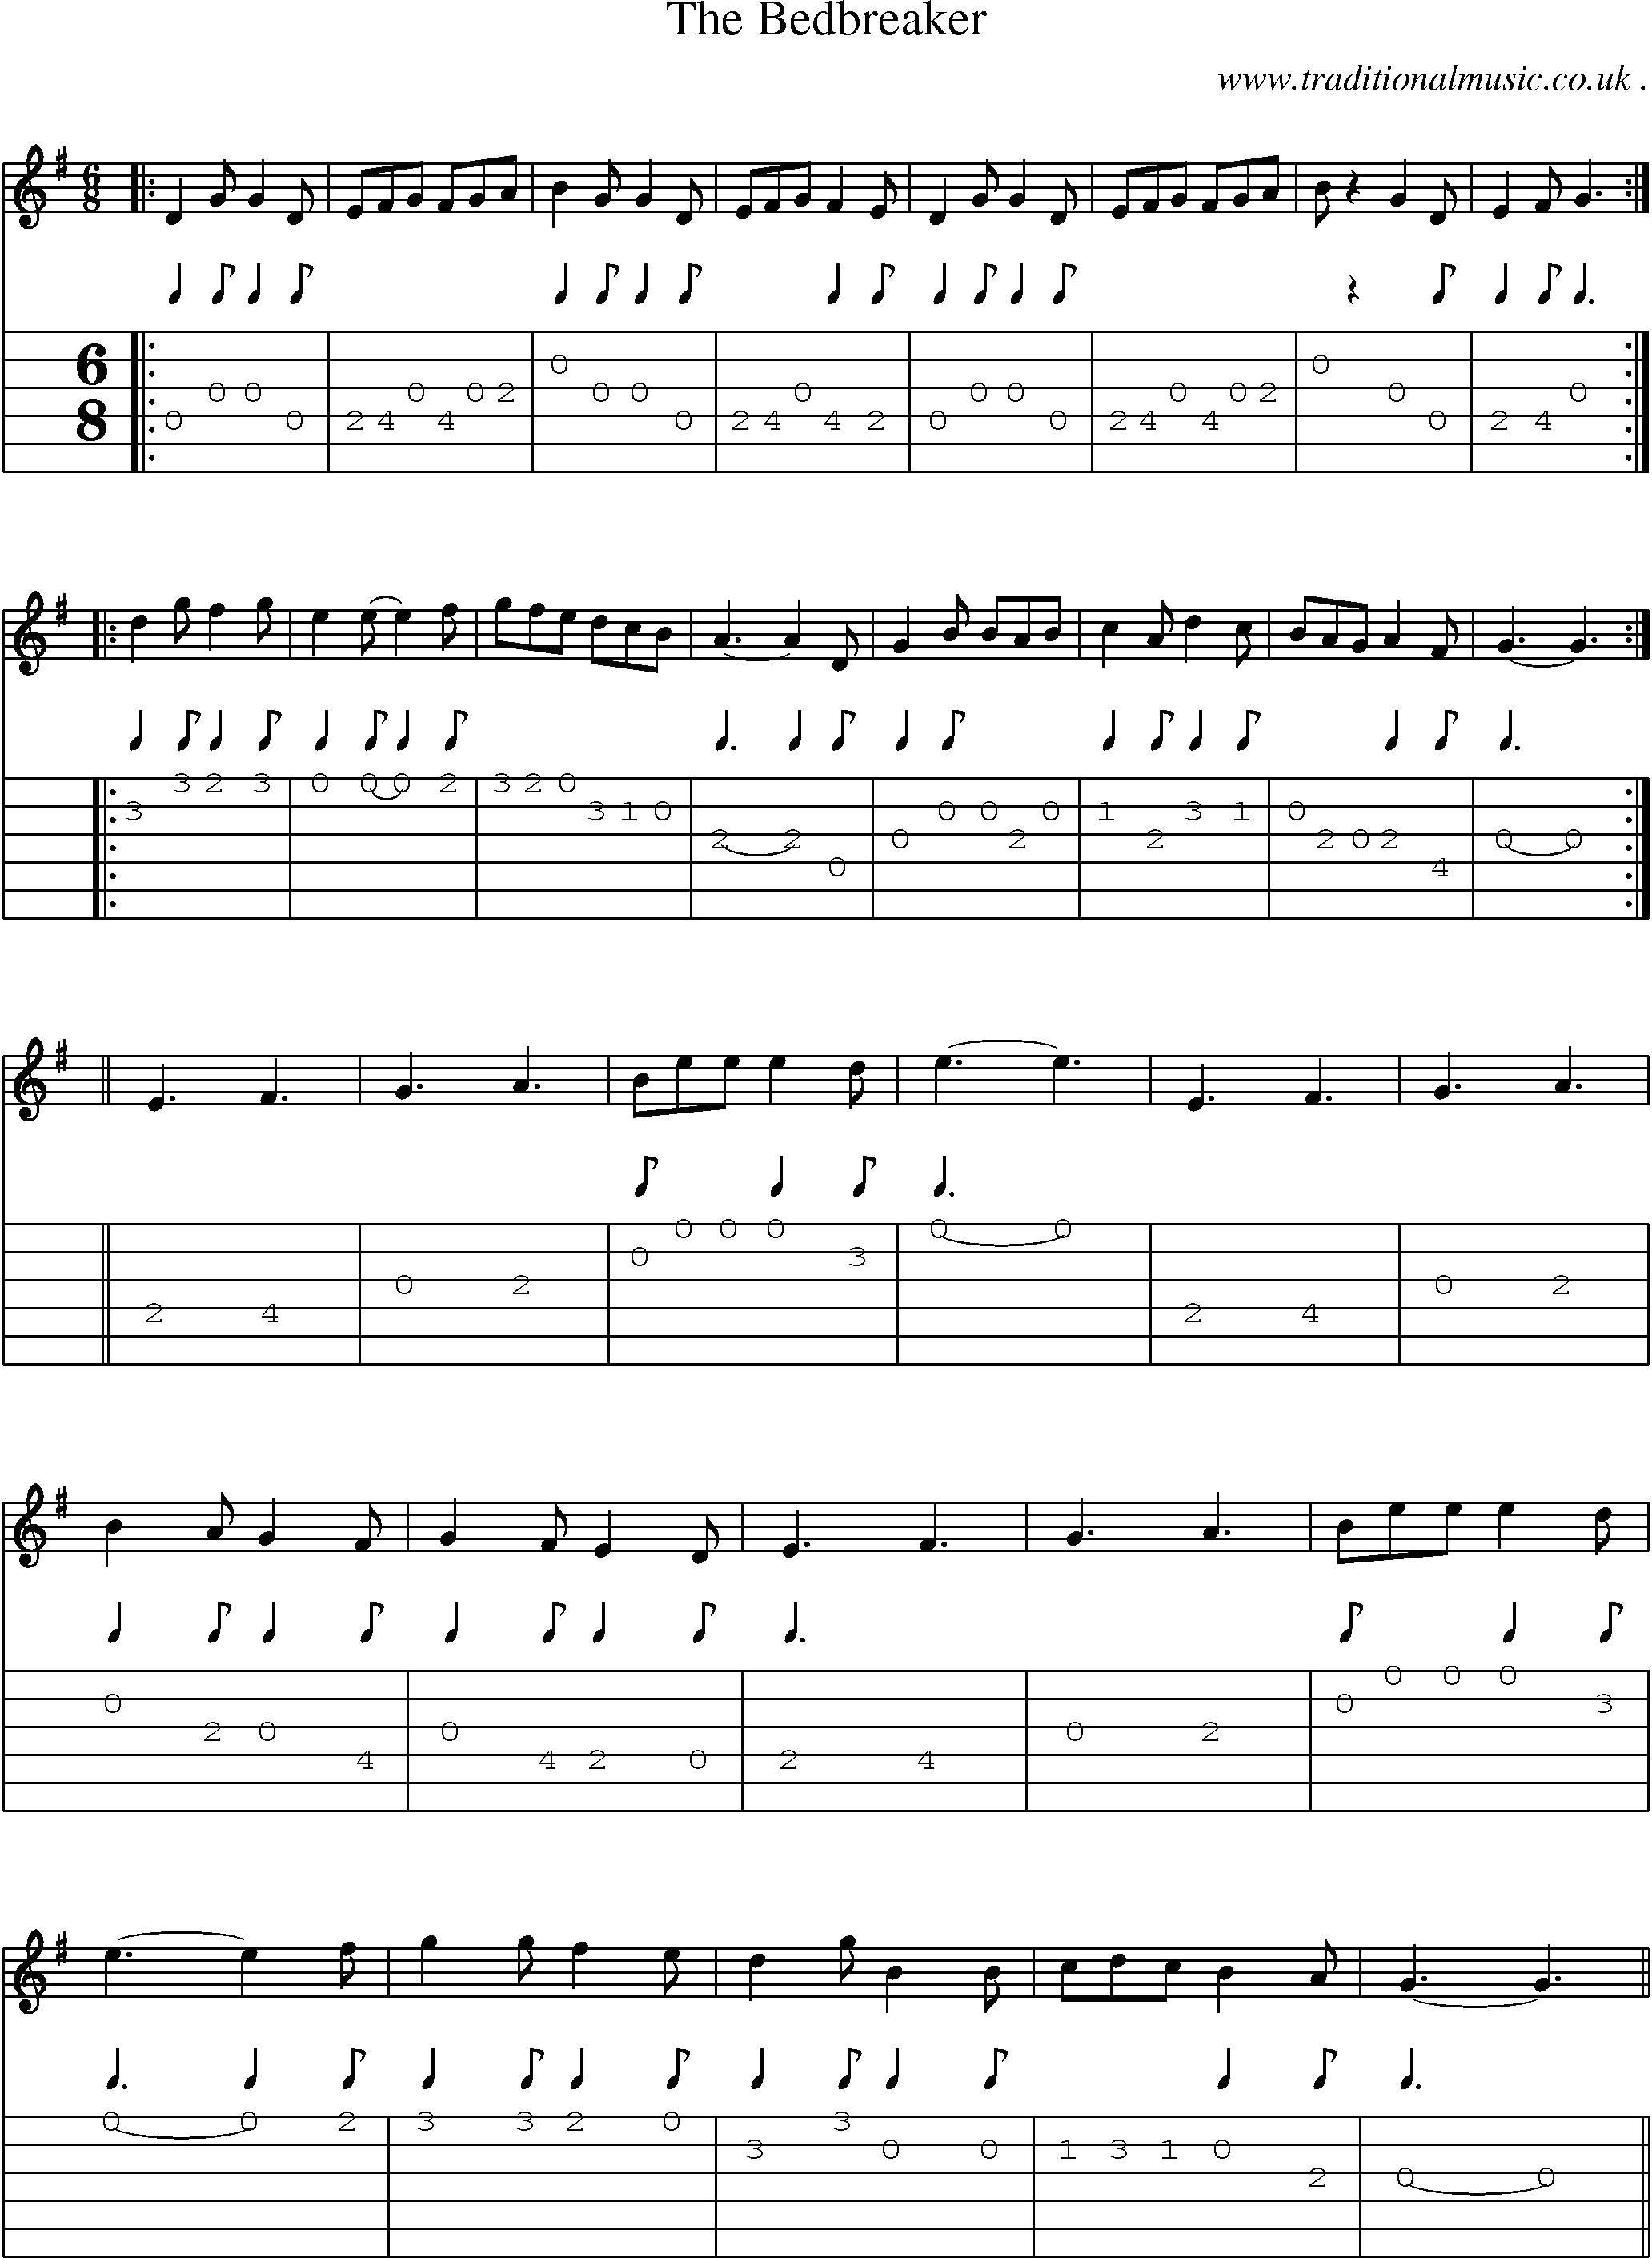 Sheet-Music and Guitar Tabs for The Bedbreaker